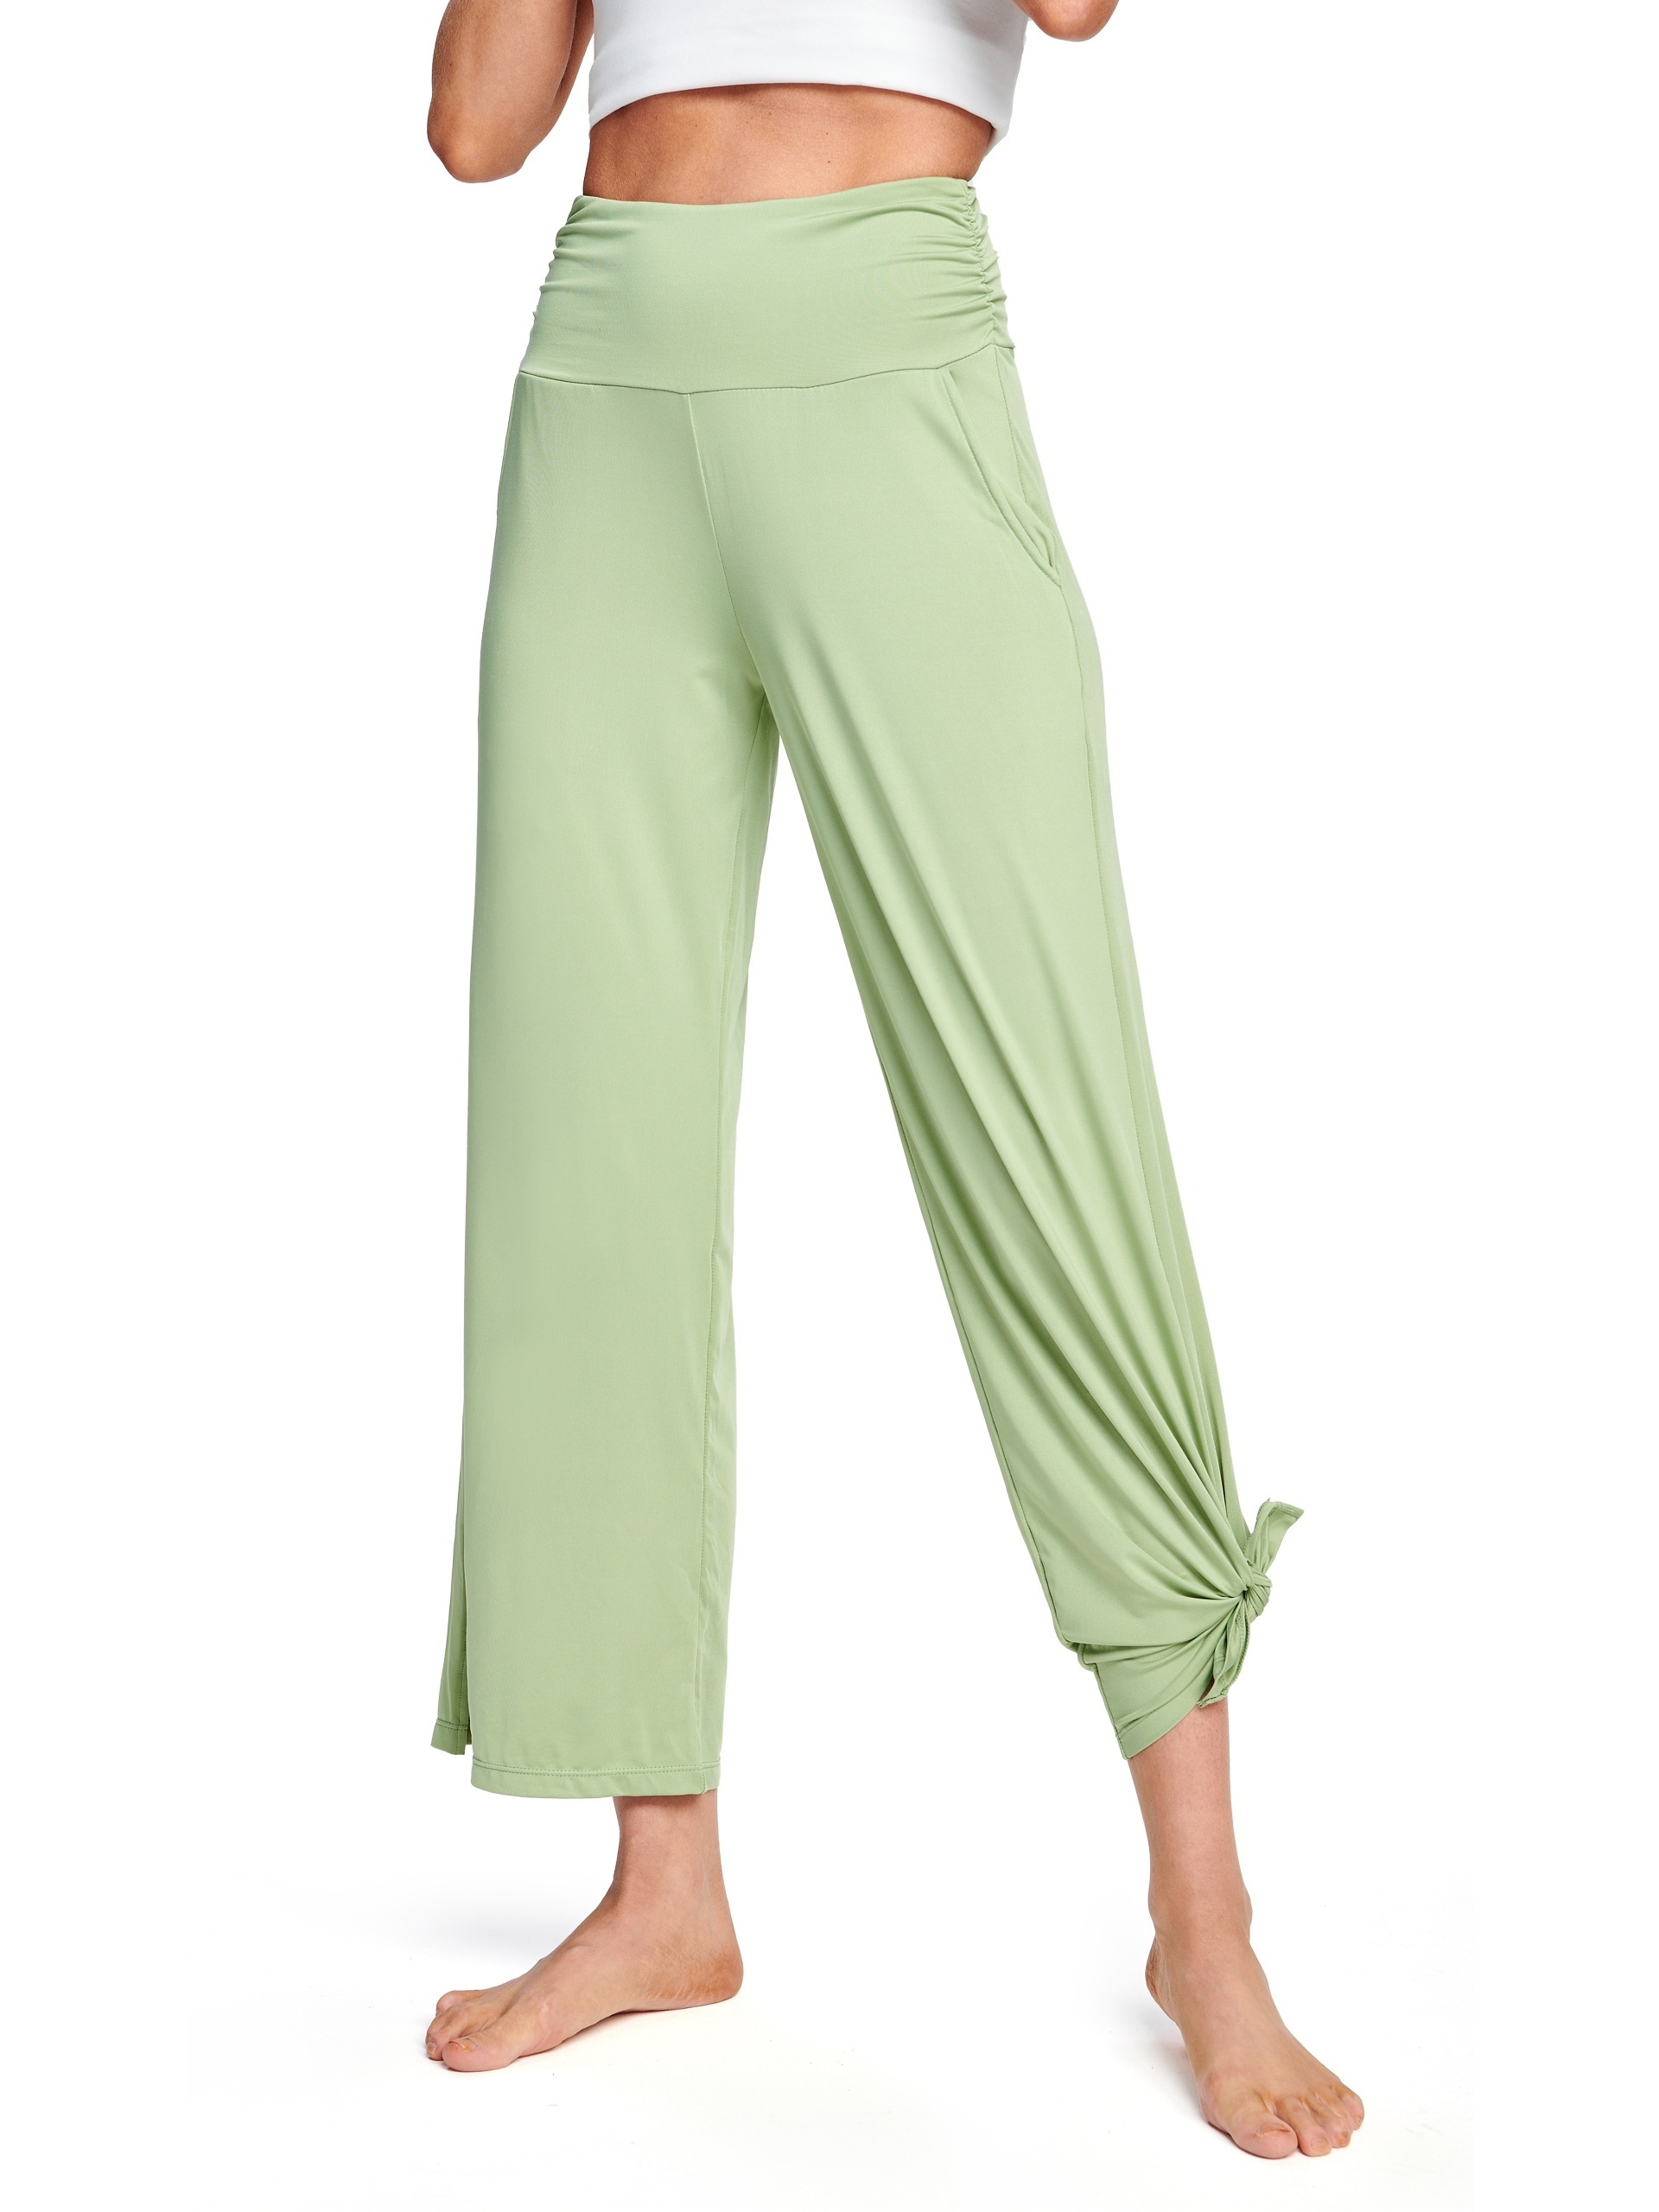 The Best Wide Leg Yoga Pants Under $20 - Megan and Wendy